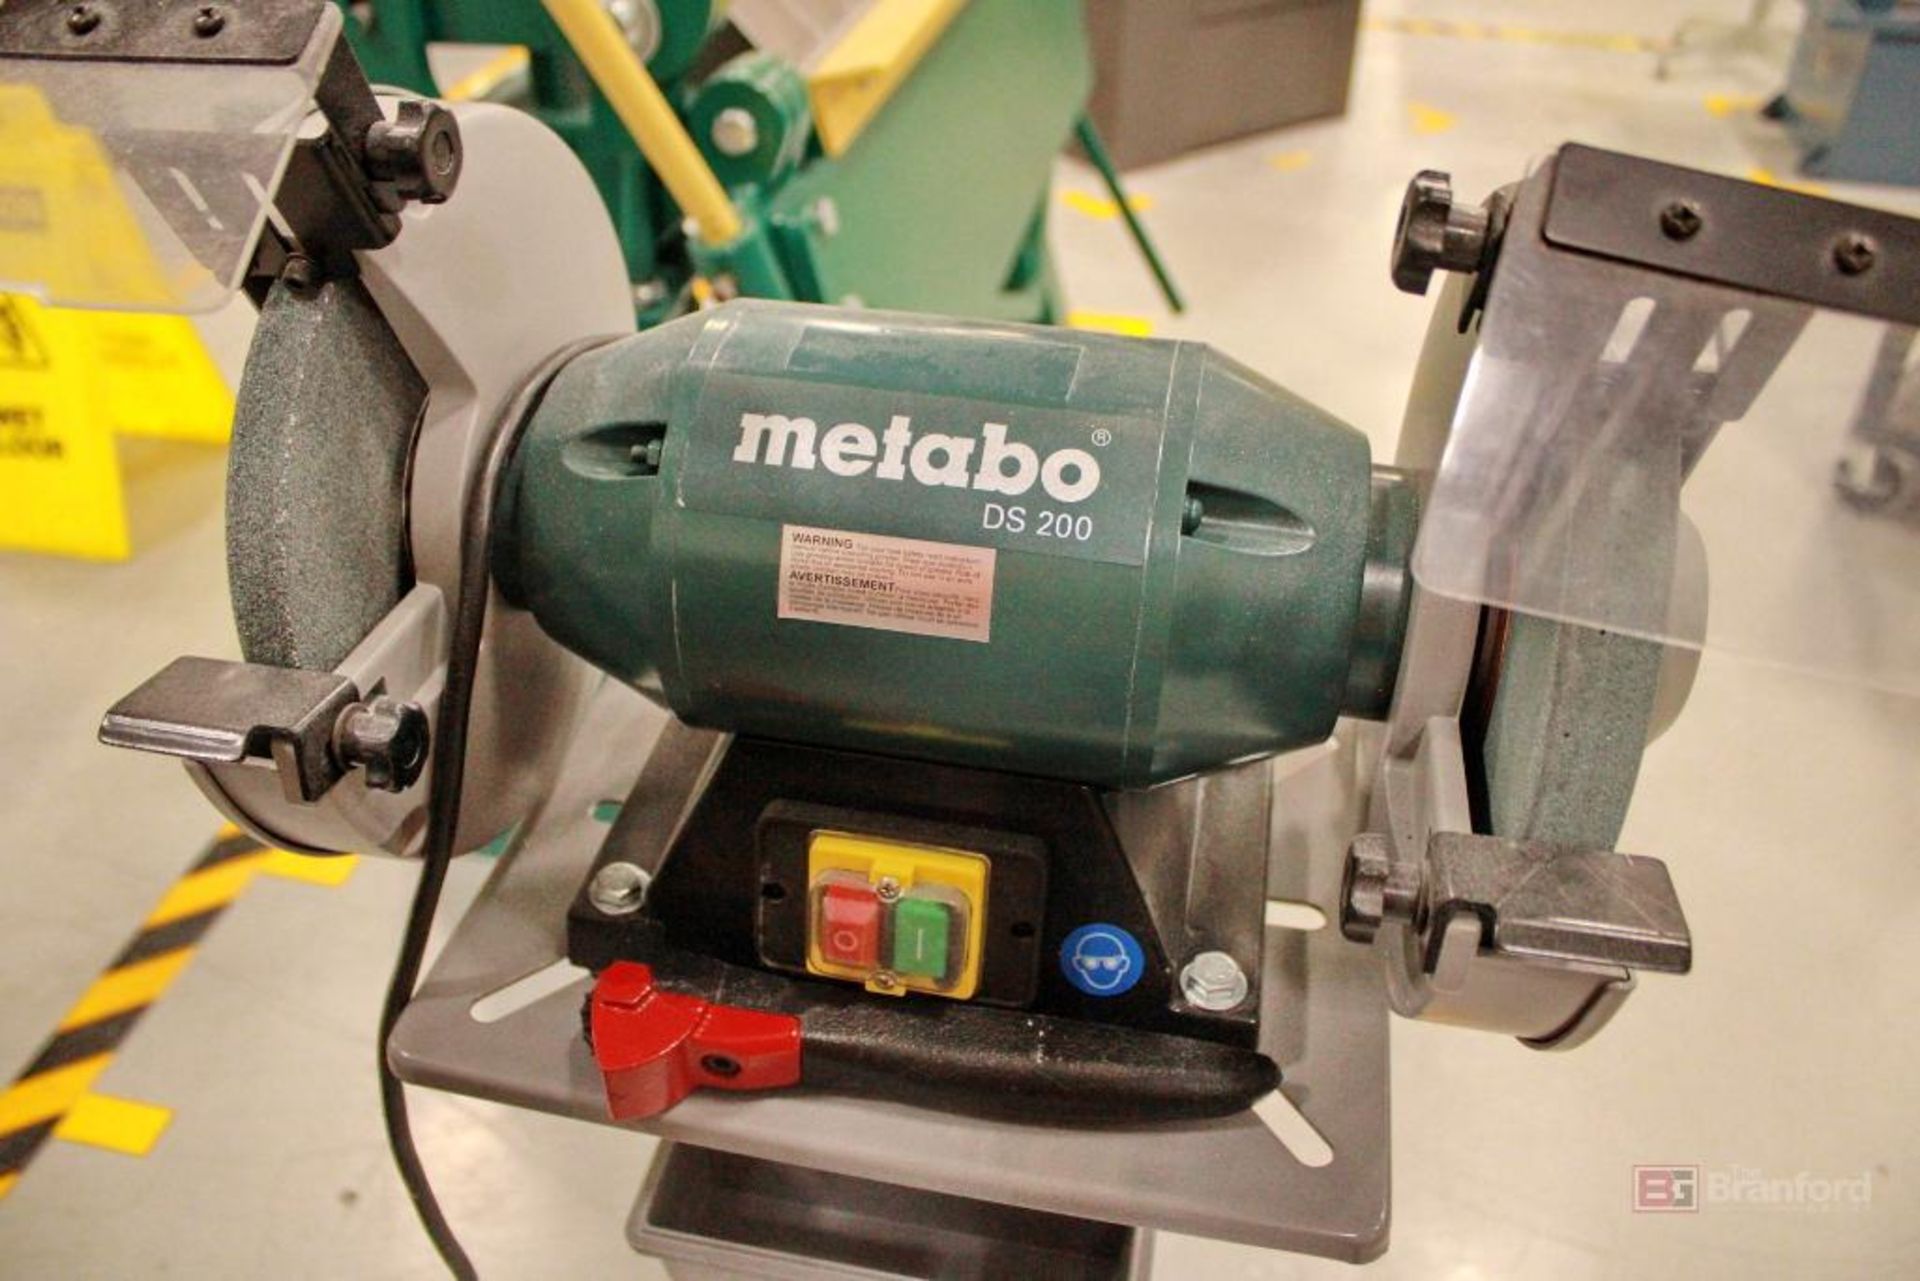 Metabo Bench Grinder Model DD 200 with Enco Stand - Image 2 of 2